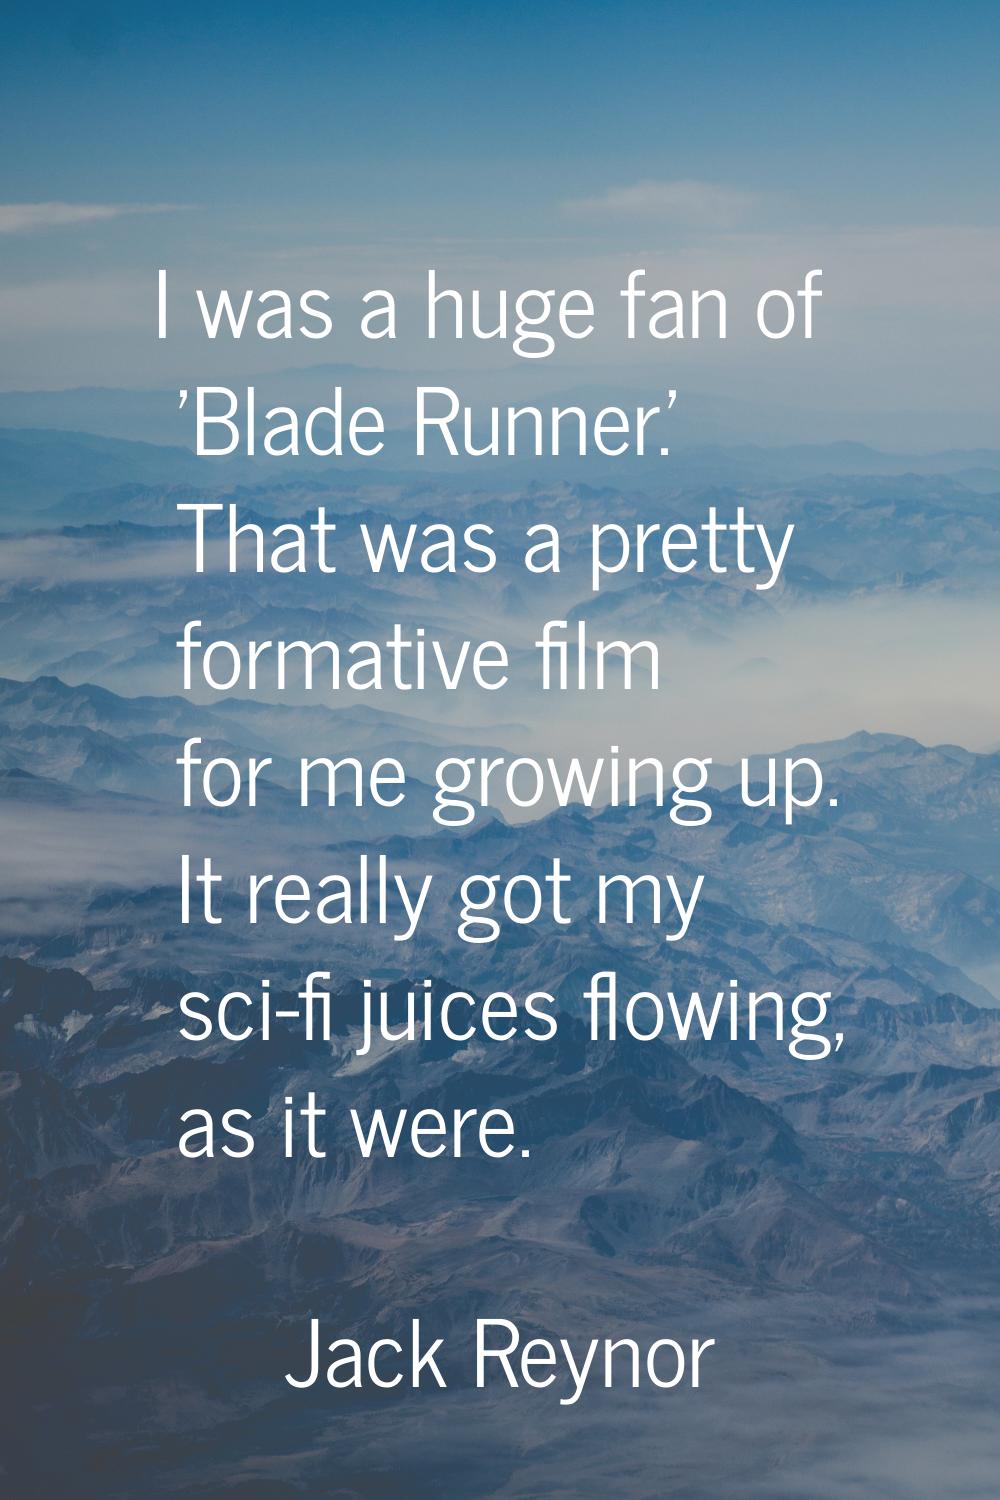 I was a huge fan of 'Blade Runner.' That was a pretty formative film for me growing up. It really g